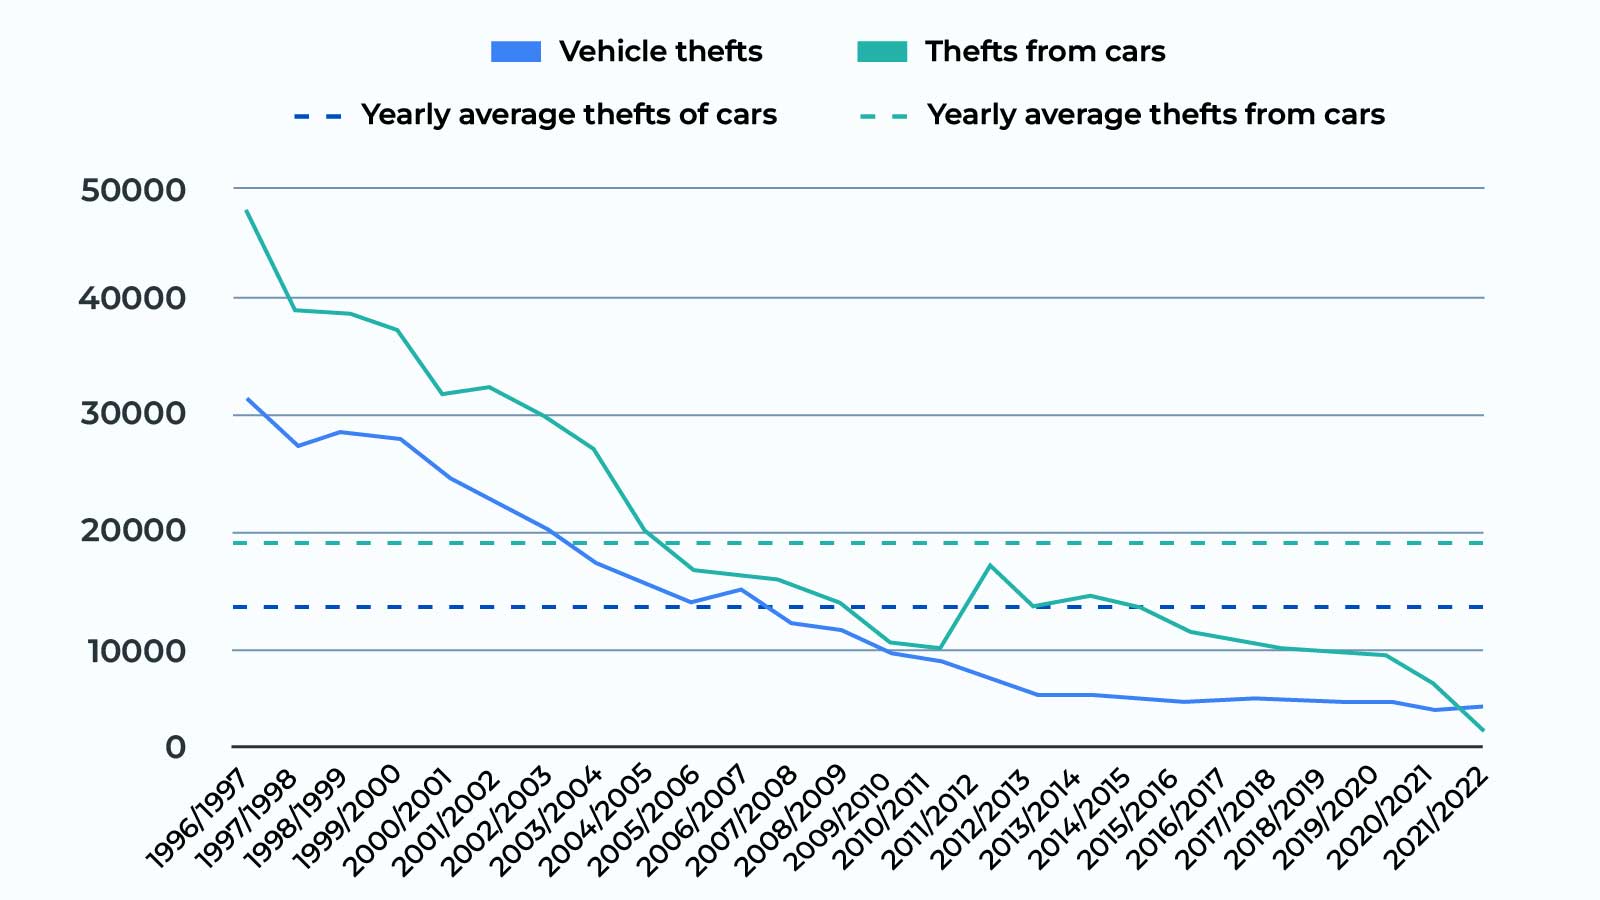 Car thefts in Scotland across the years